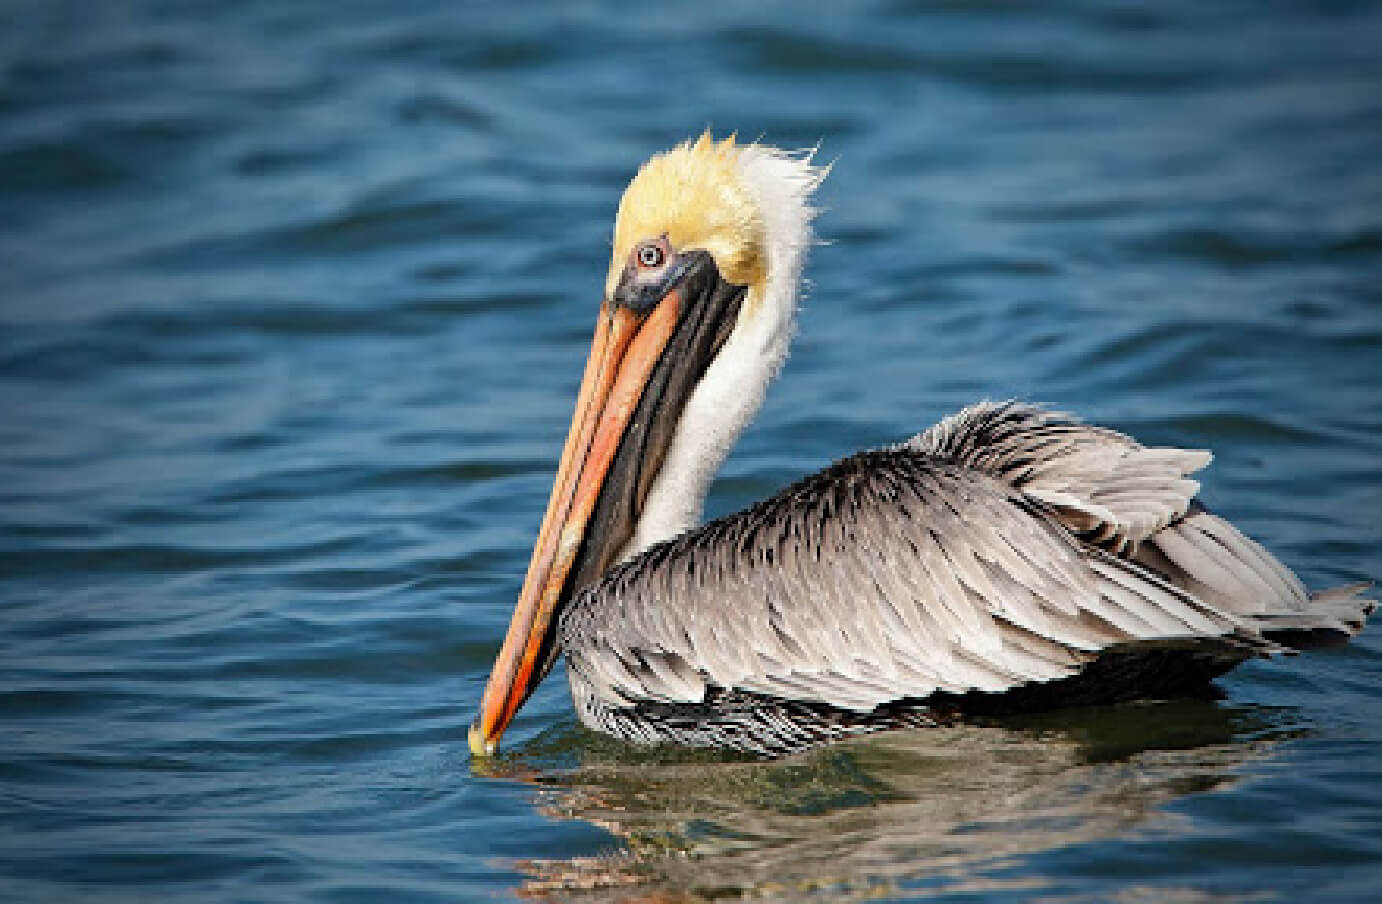 A Brown Pelican sitting in the water, with its beak submerged slightly